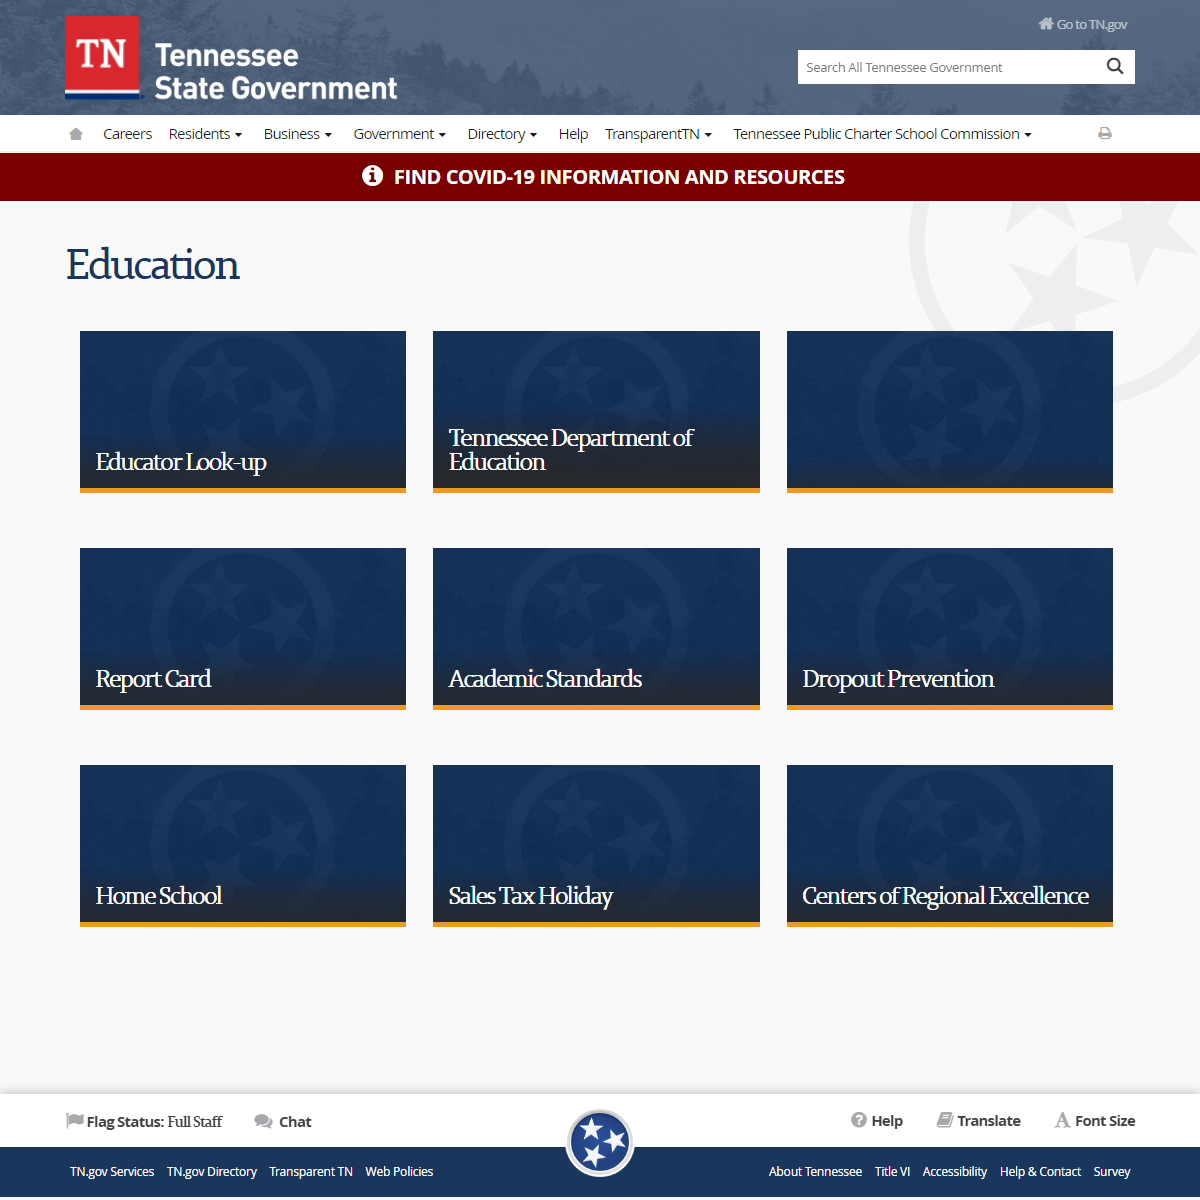 A complete backup of https://www.tn.gov/education-mp.html